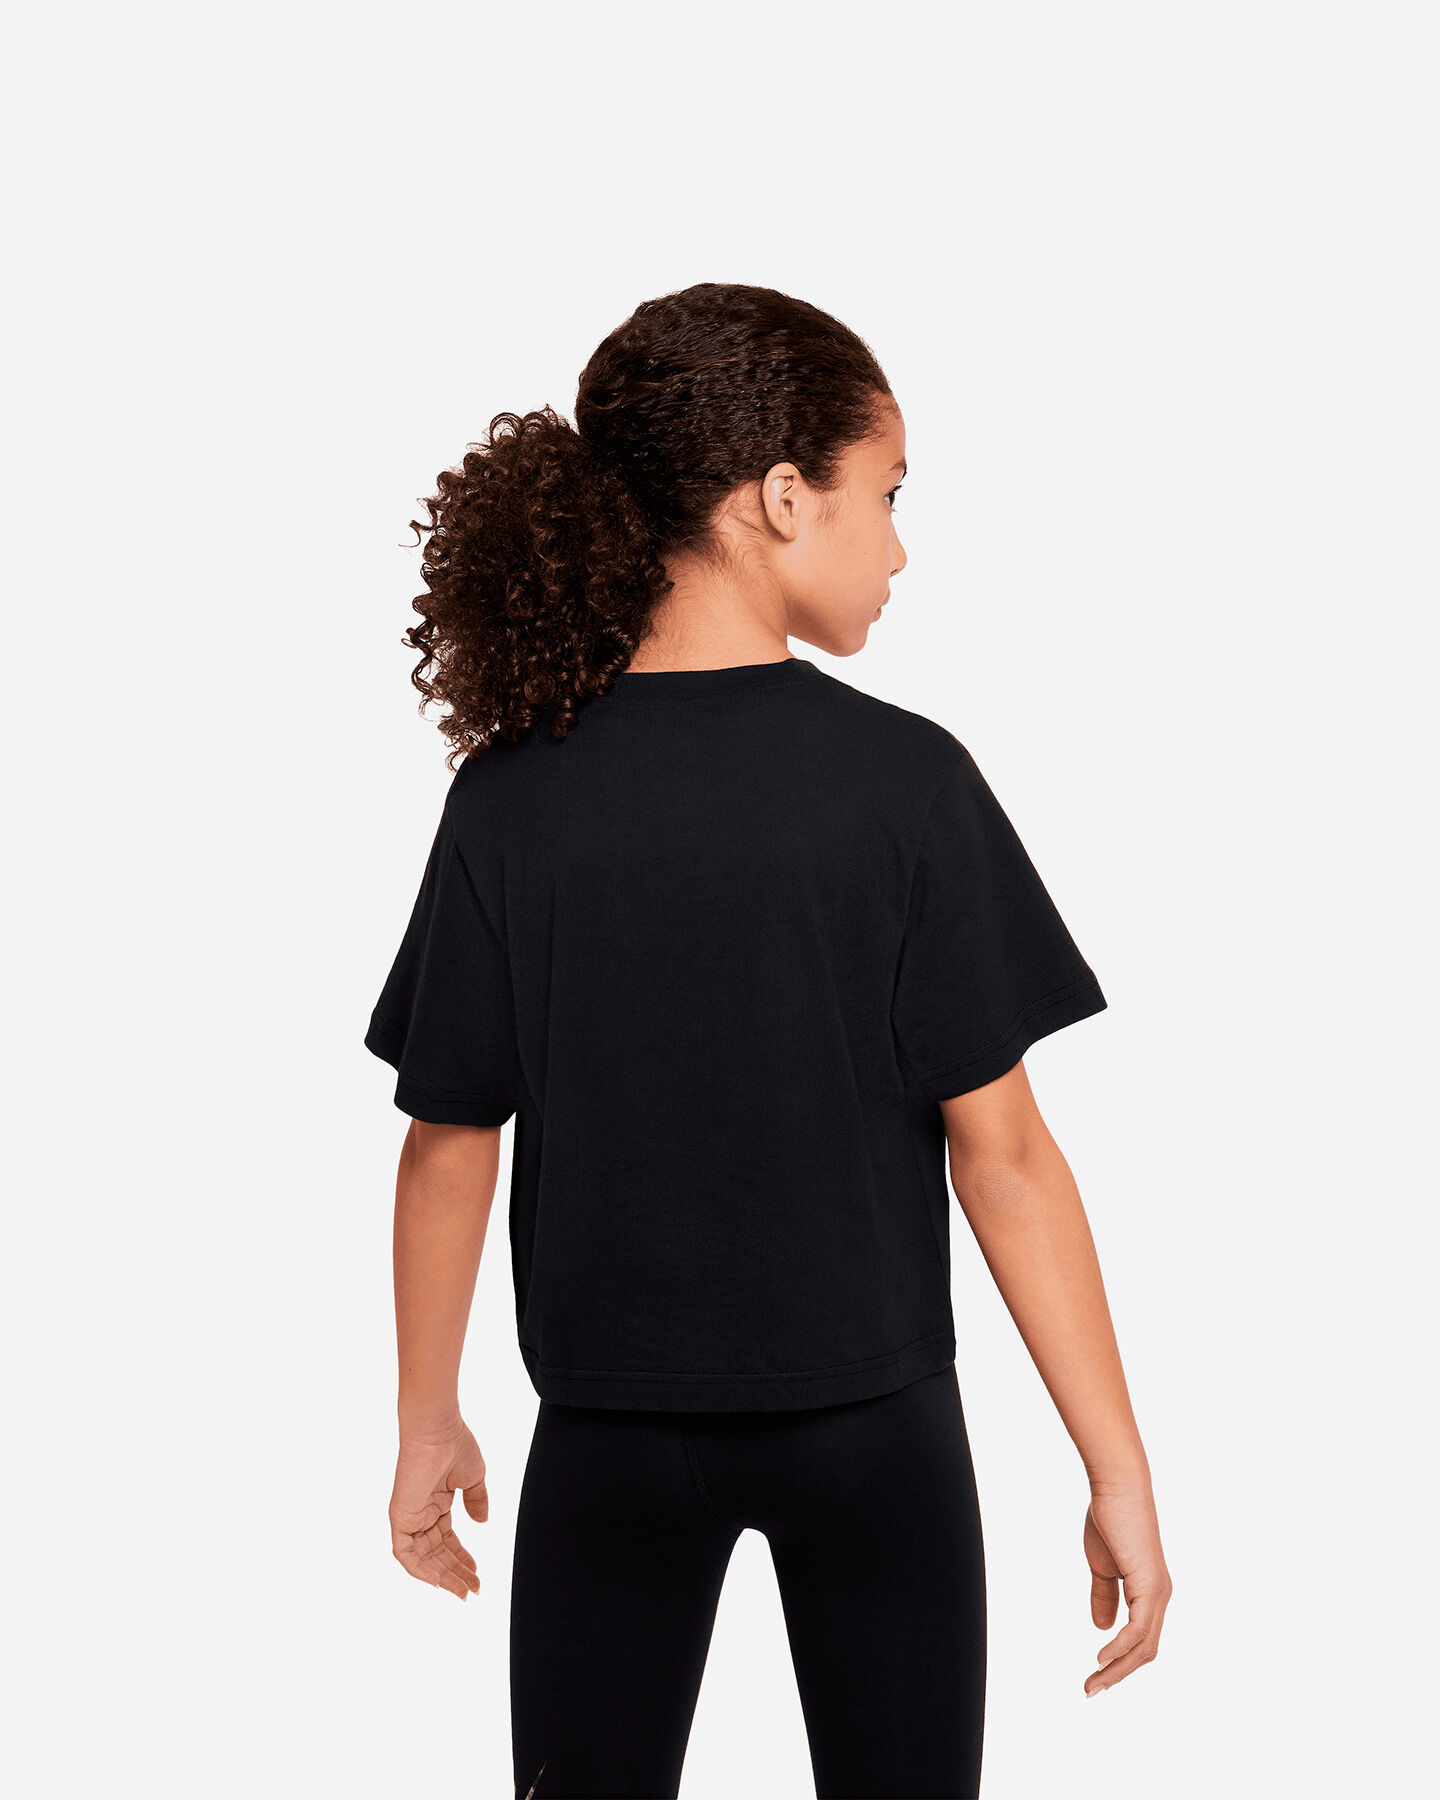  T-Shirt NIKE IRIDESCENT JR S5495263 scatto 3